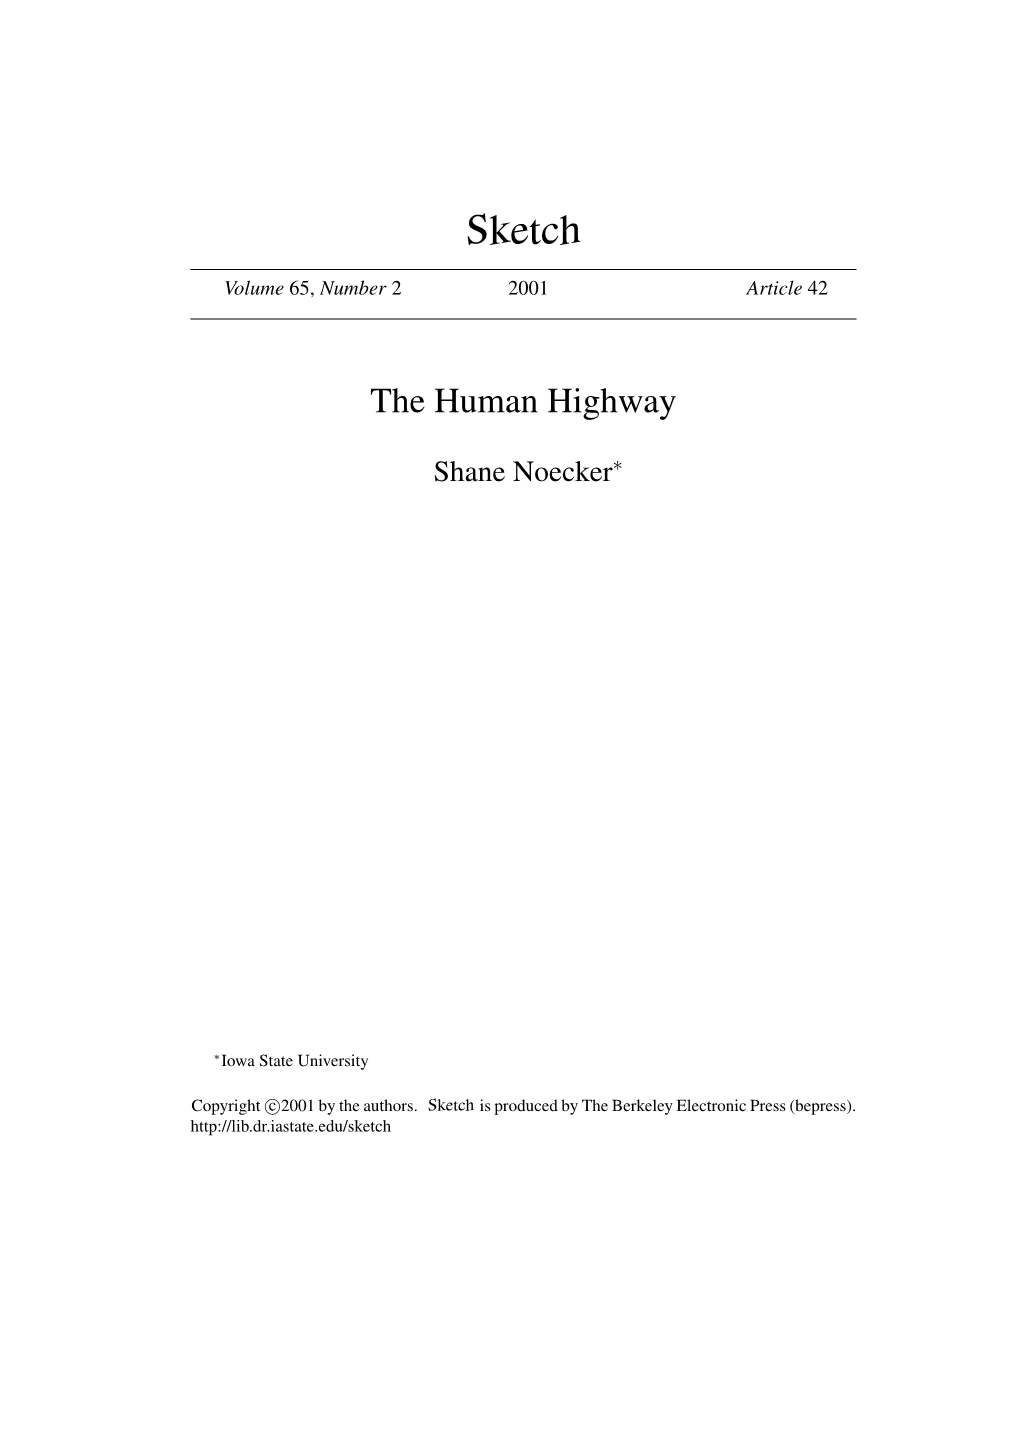 The Human Highway